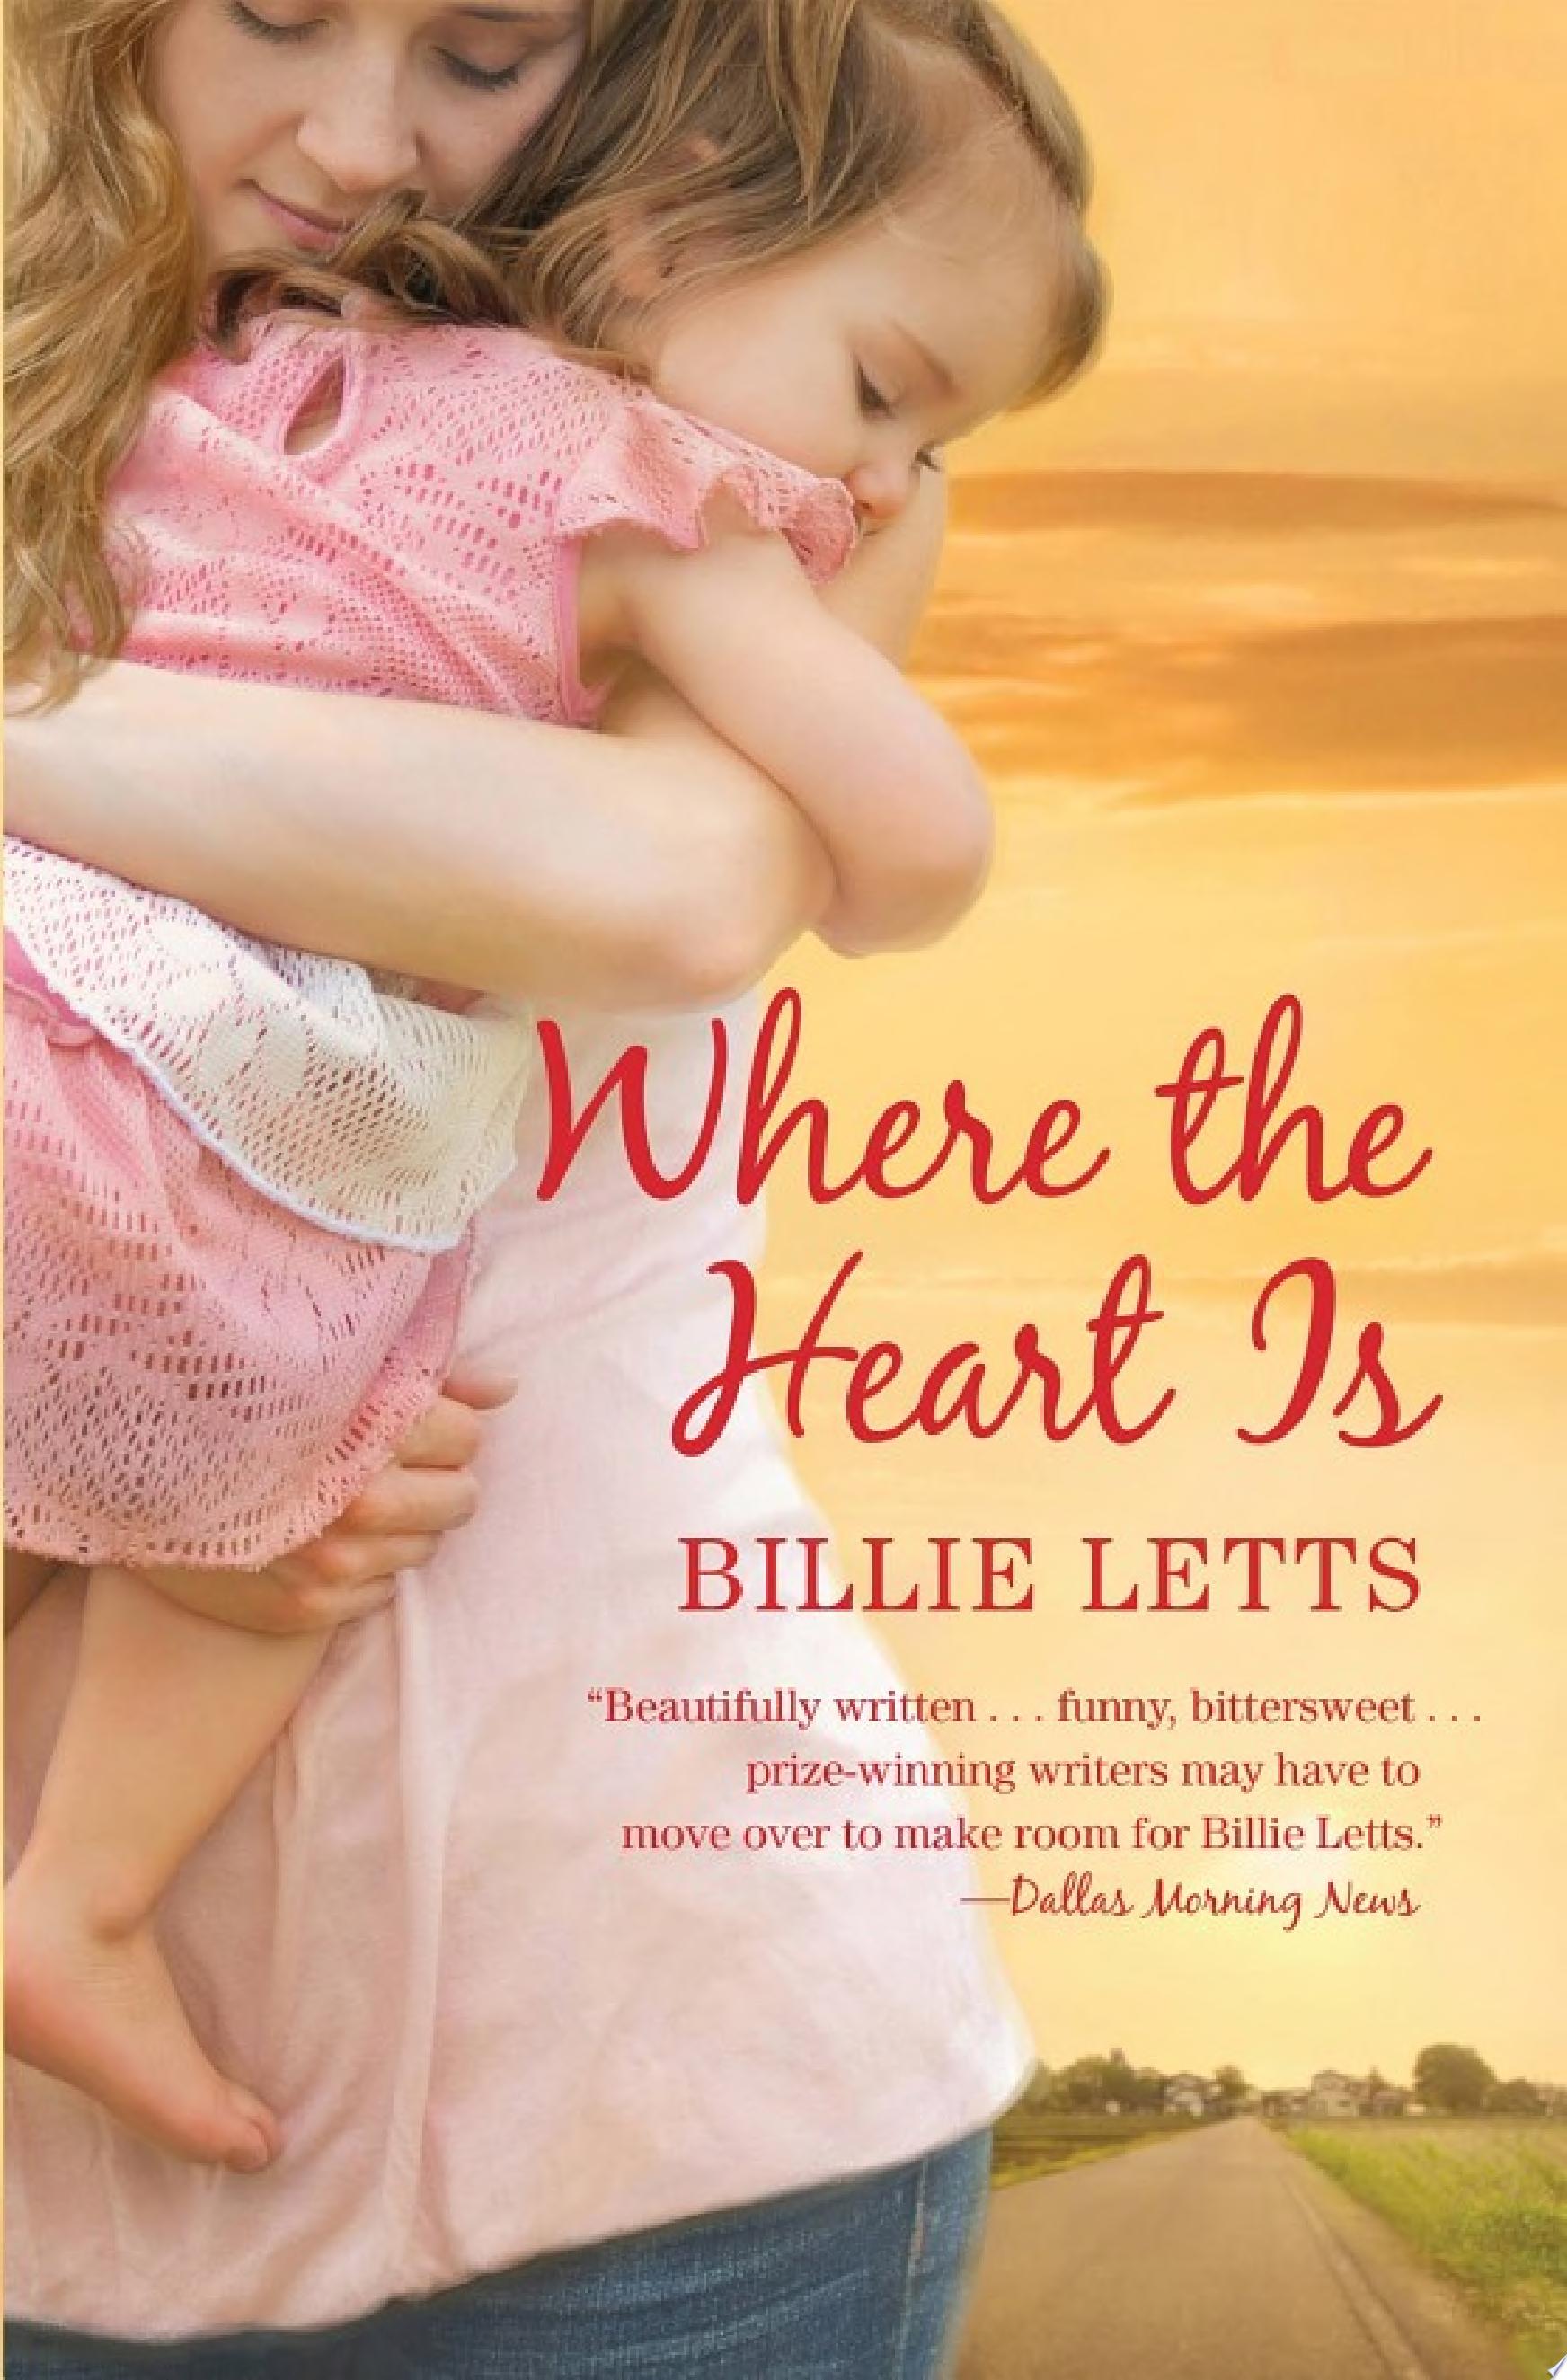 Image for "Where the Heart Is"